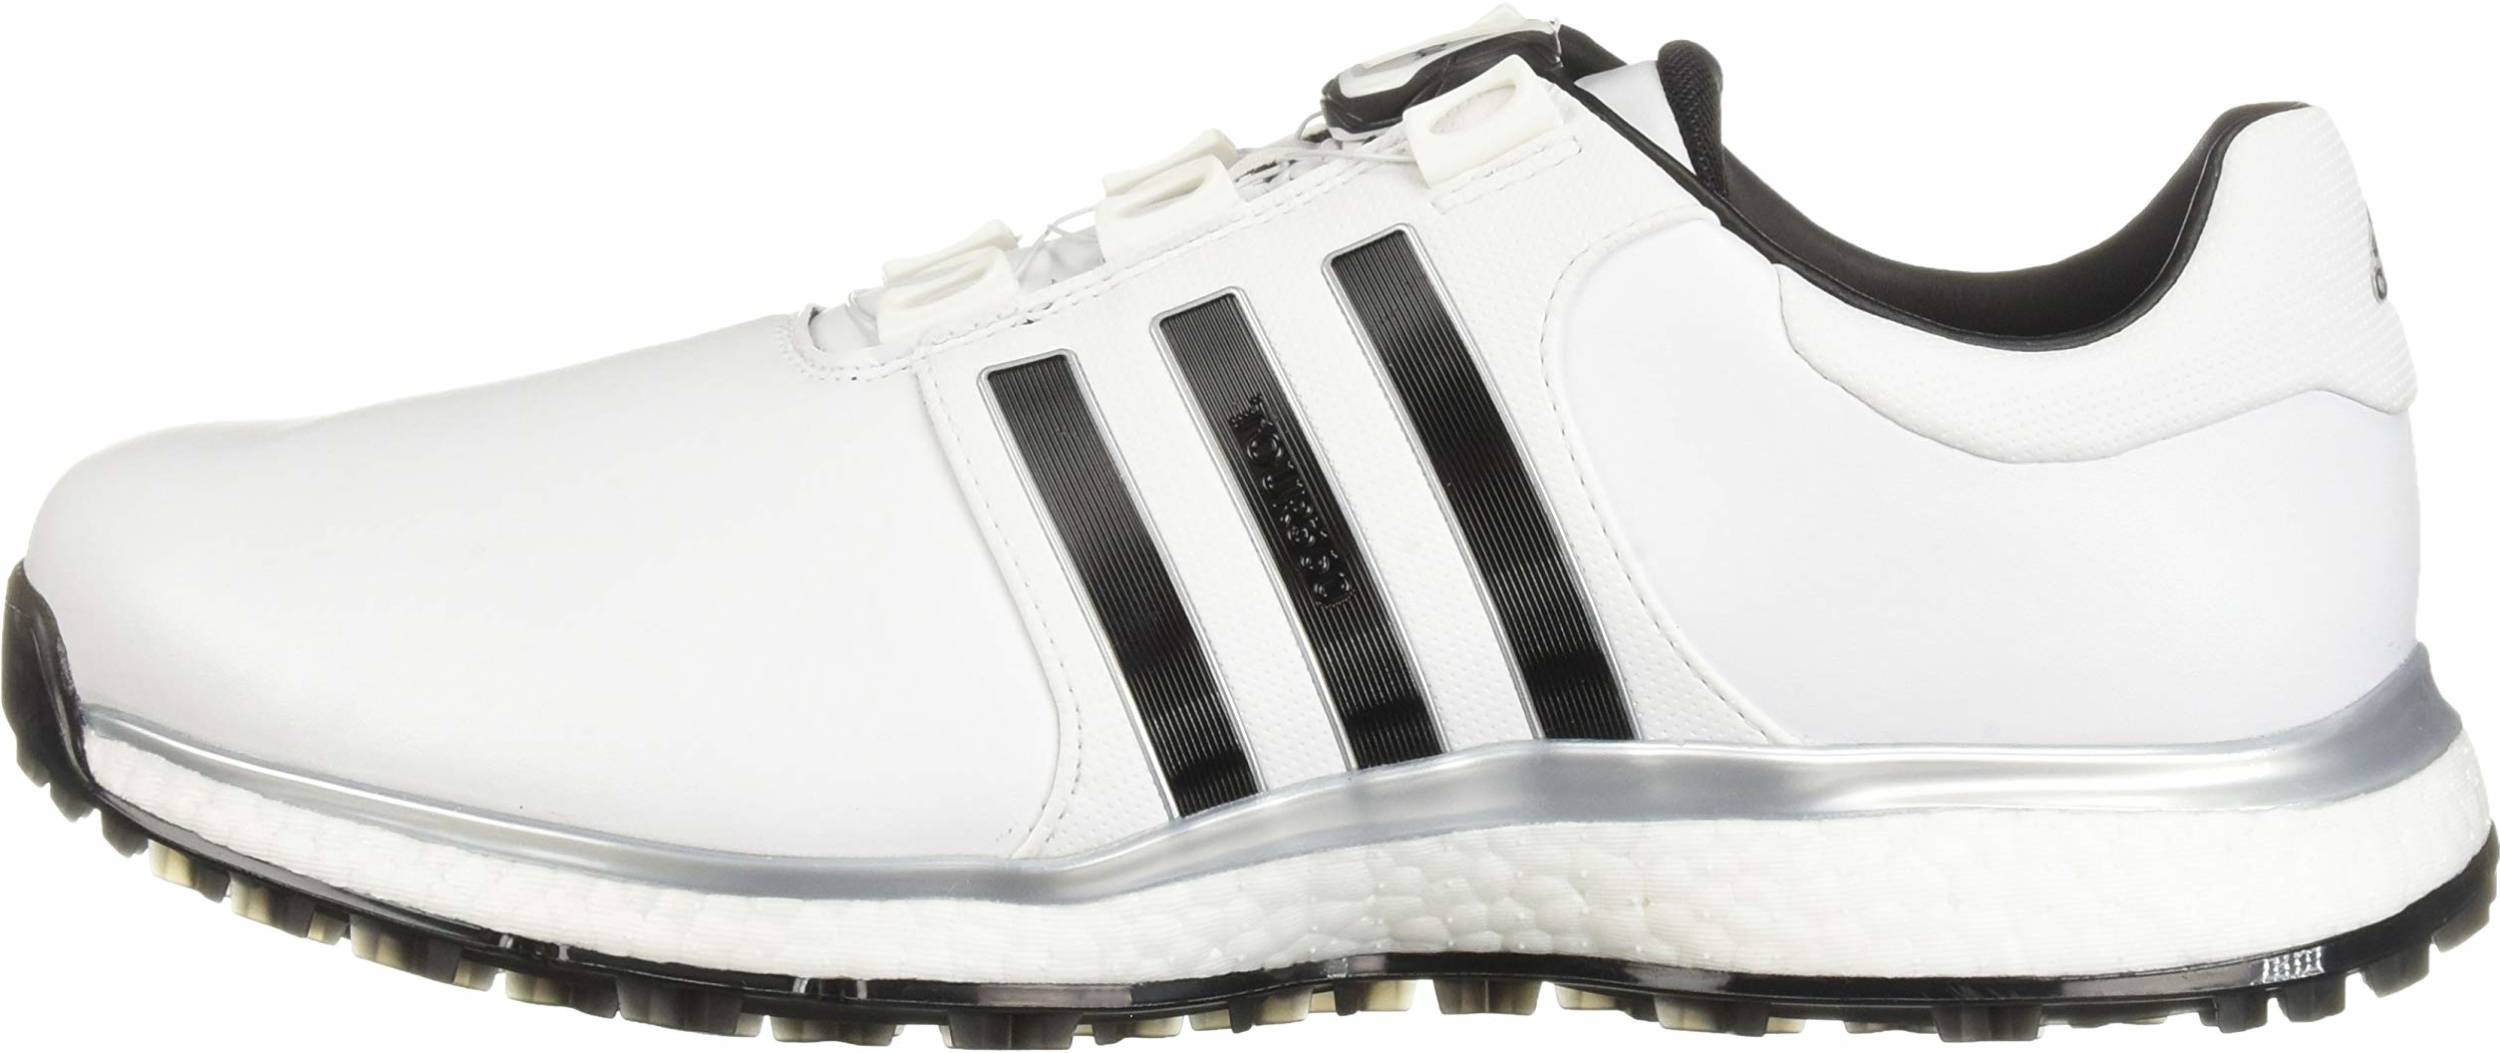 Industrialize Tuesday hot Adidas Tour360 XT SL BOA Review 2022, Facts, Deals | RunRepeat